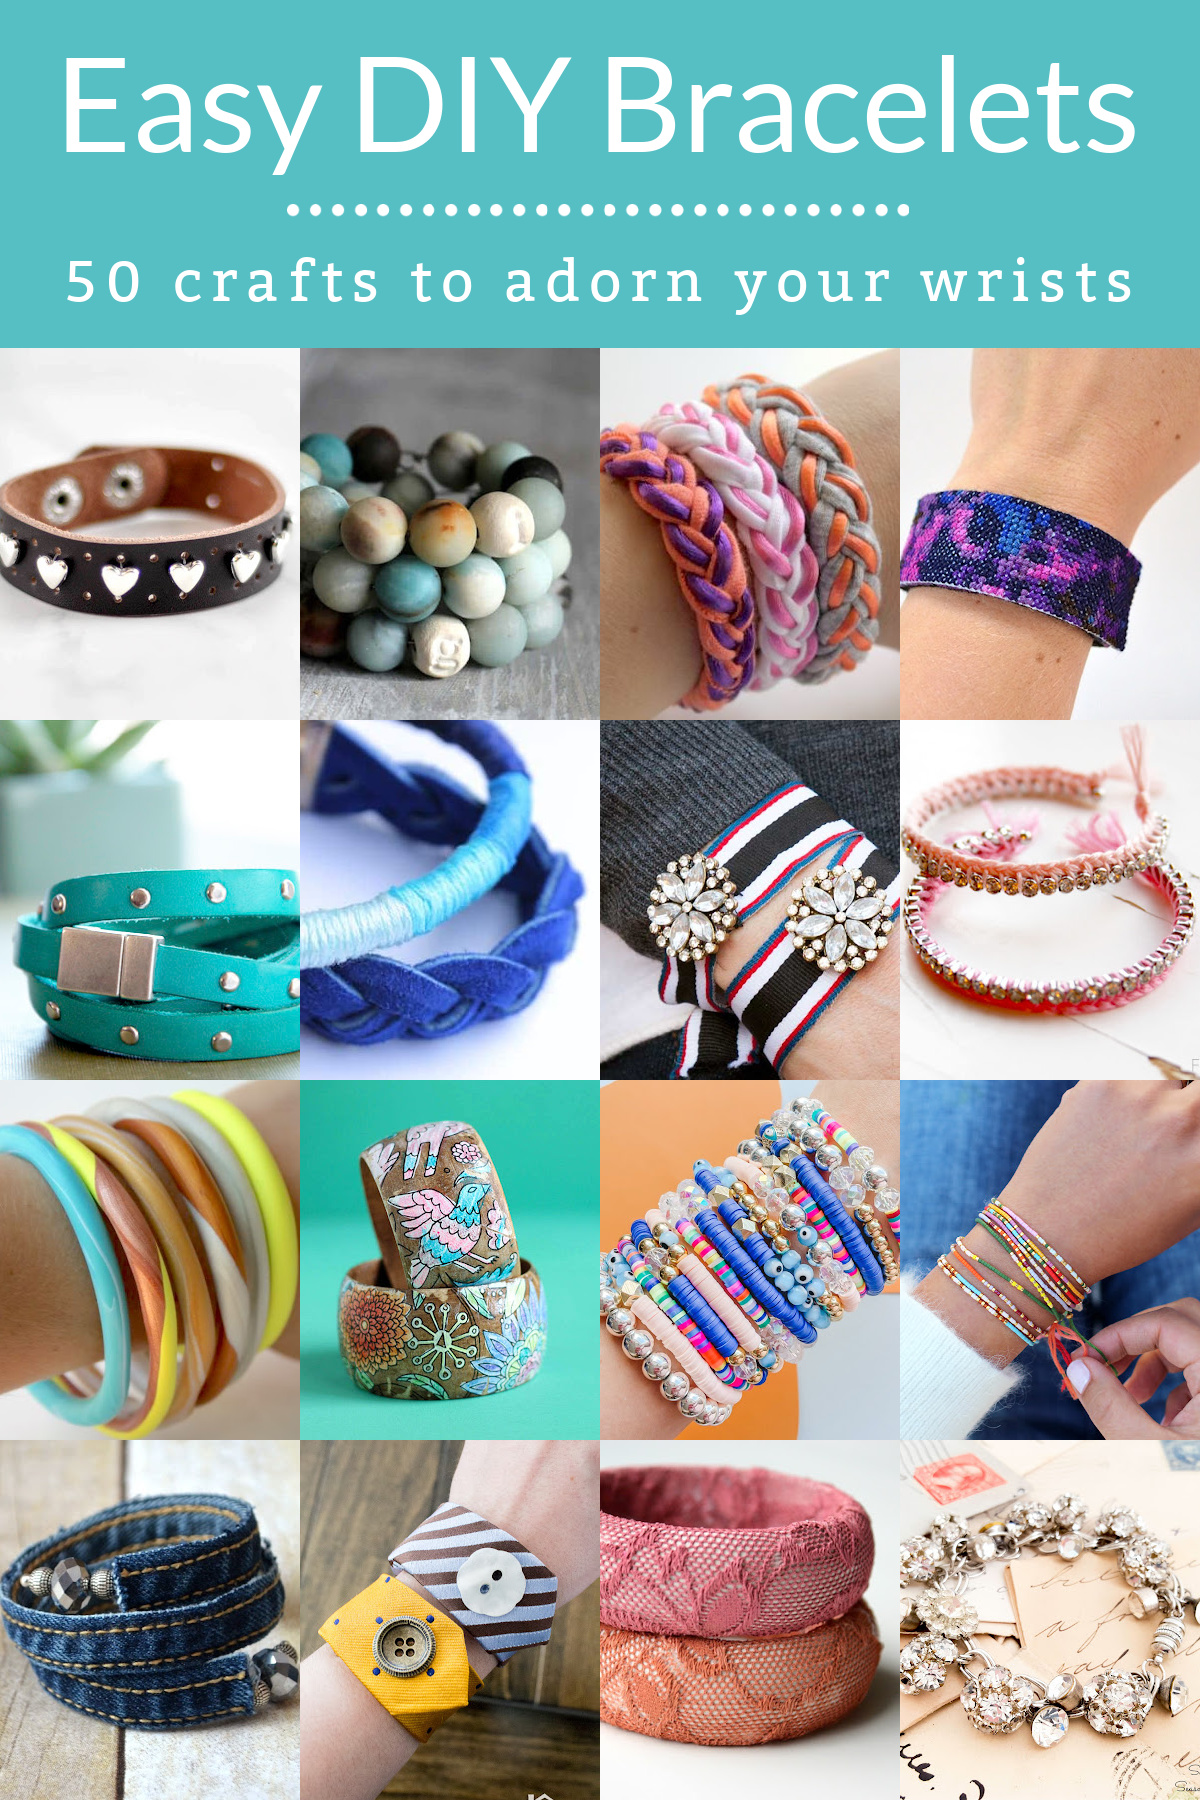 Easy DIY Bracelets You'll Want to Make